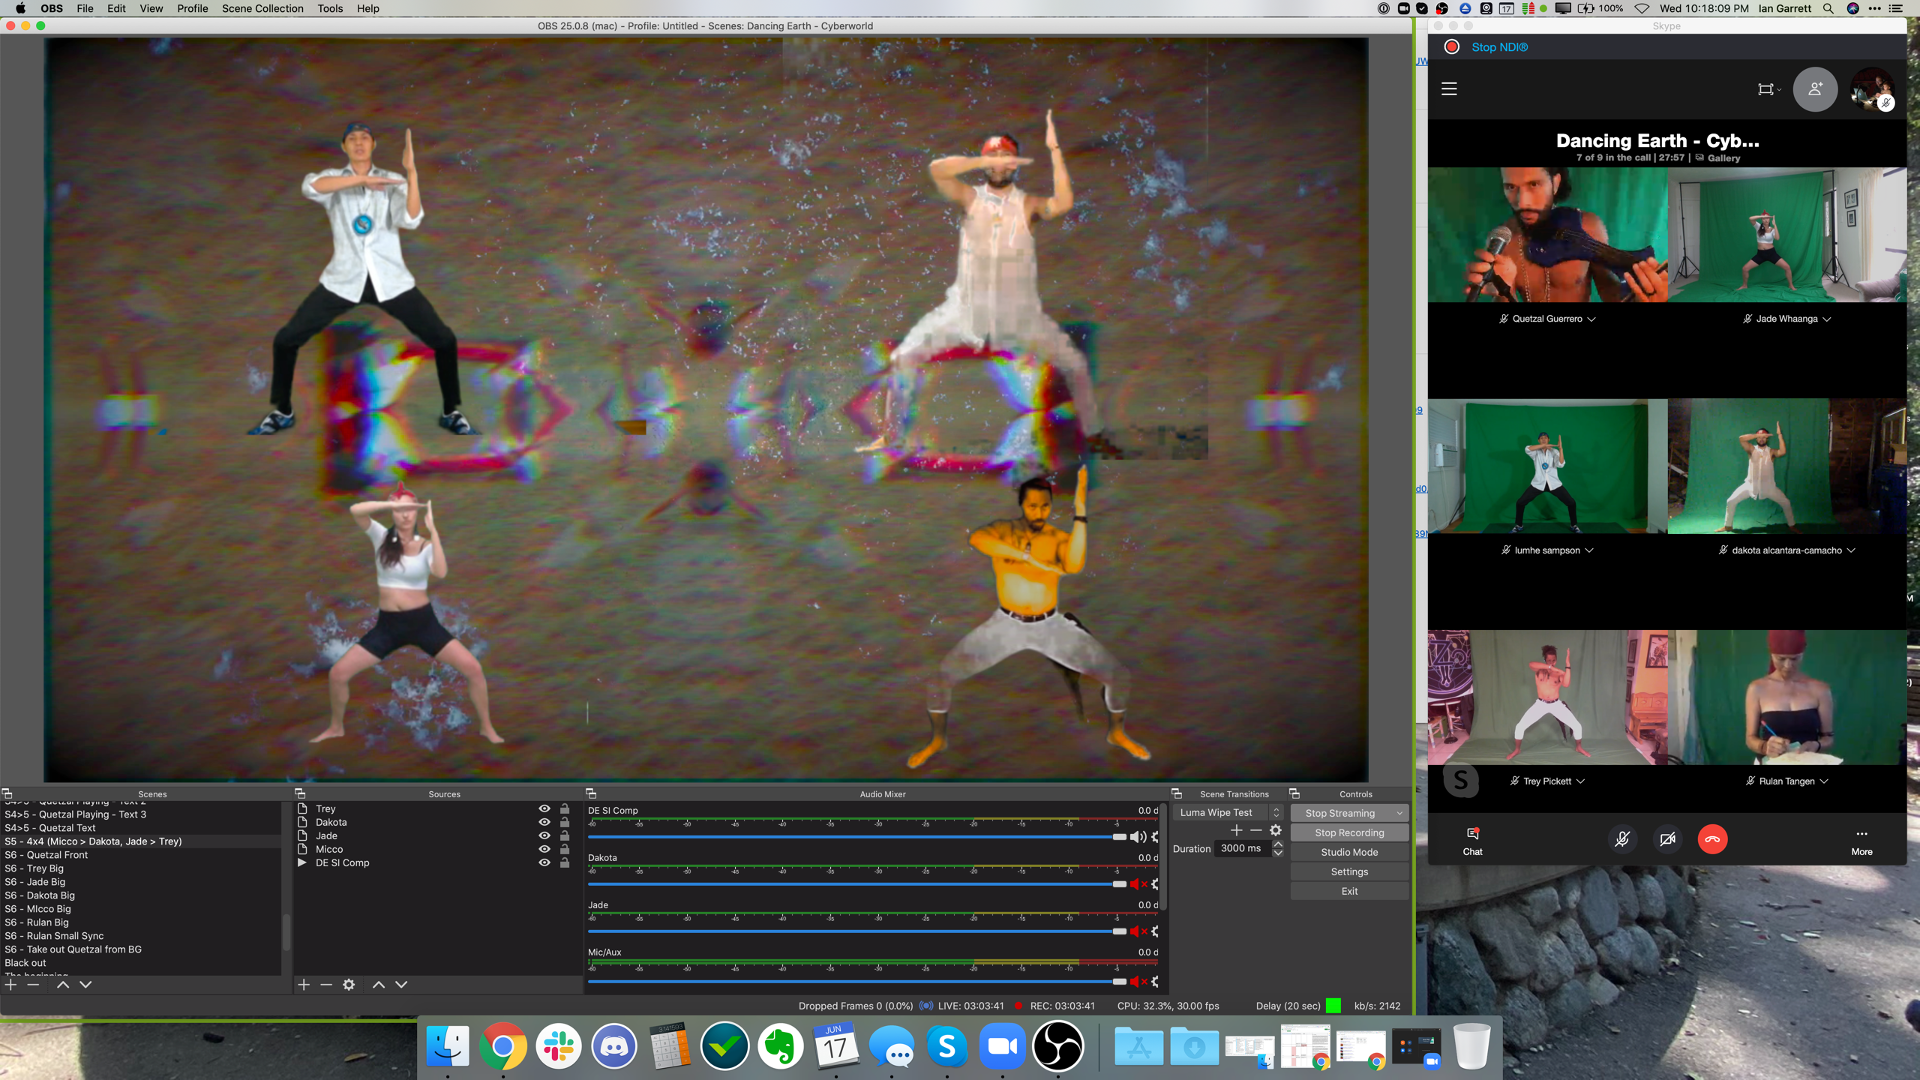 Screen shot taken on broadcasting pc during rehearsal showing OBS composite video and Skype call with dancers.